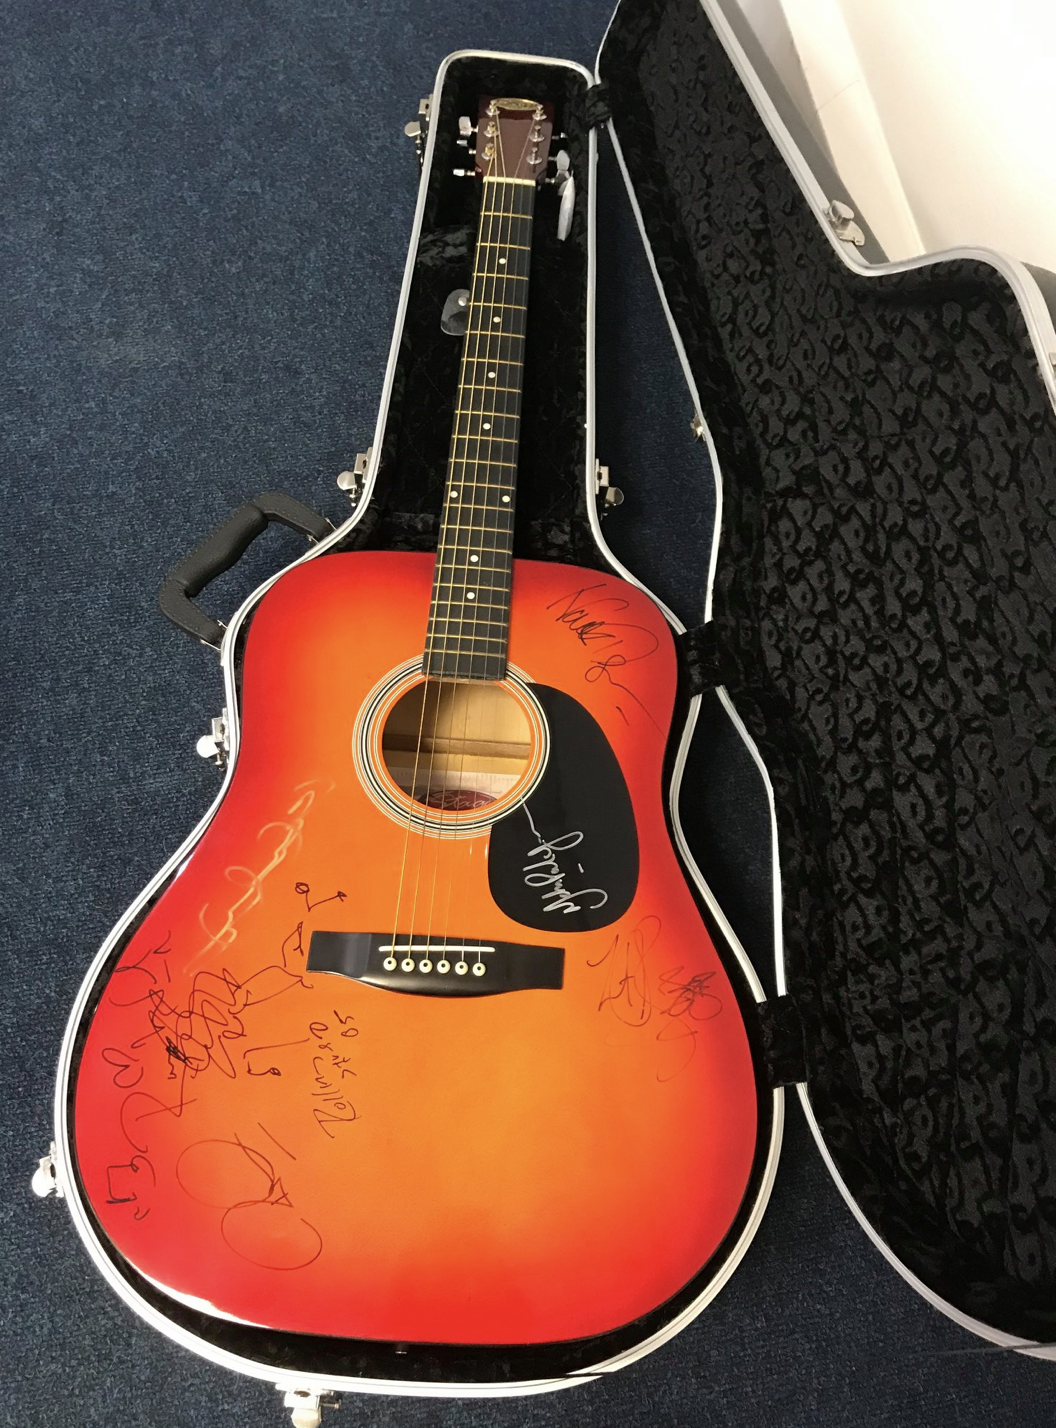 Signed Rolling Stones guitar